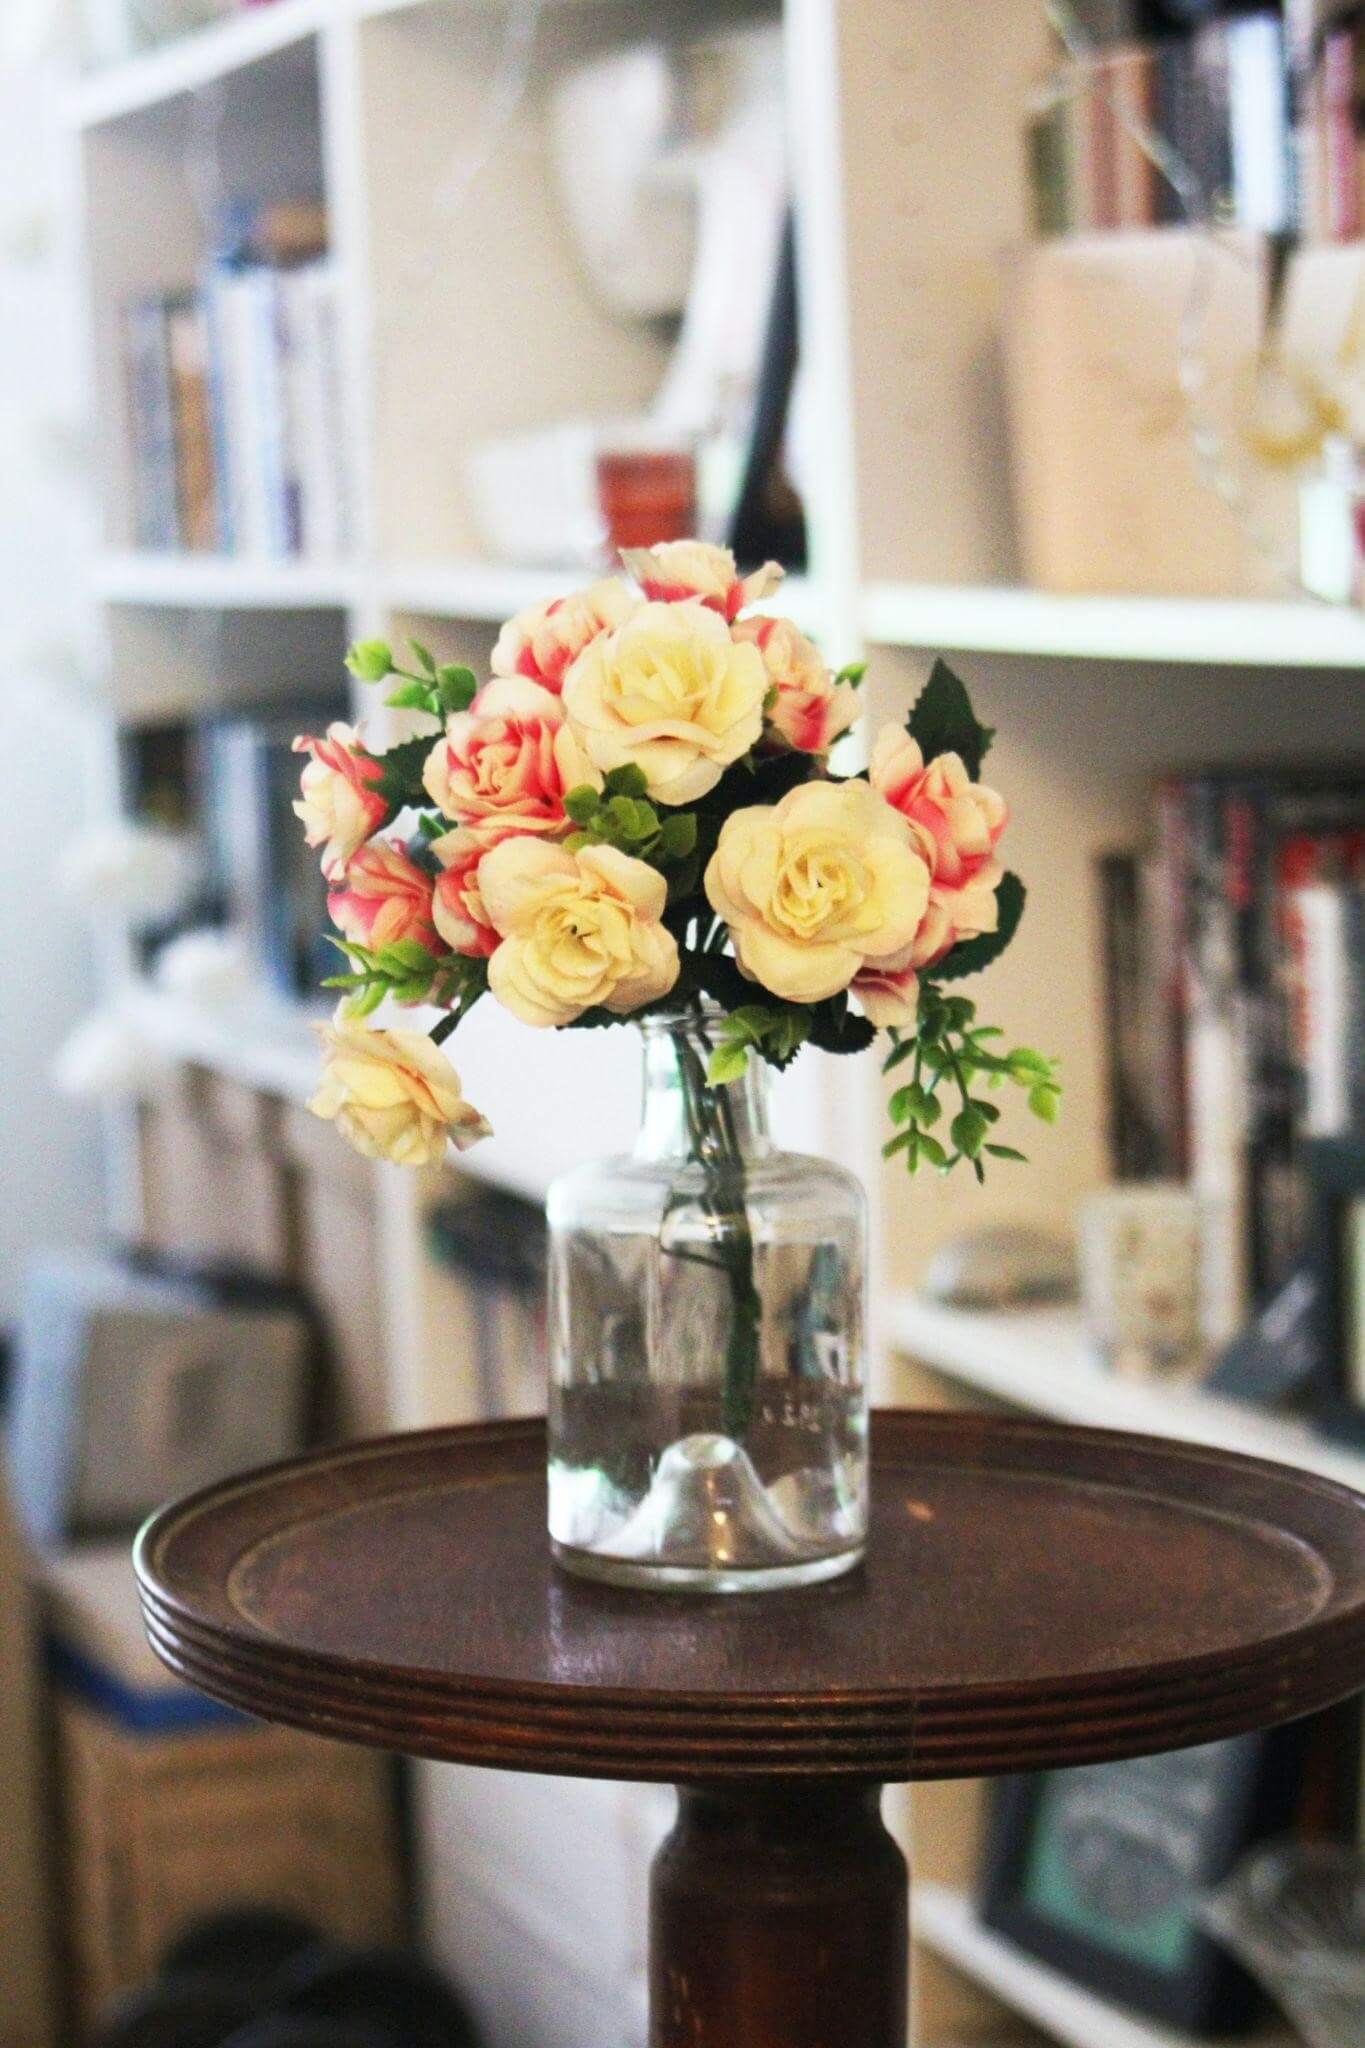 How to secure artificial flowers in a vase